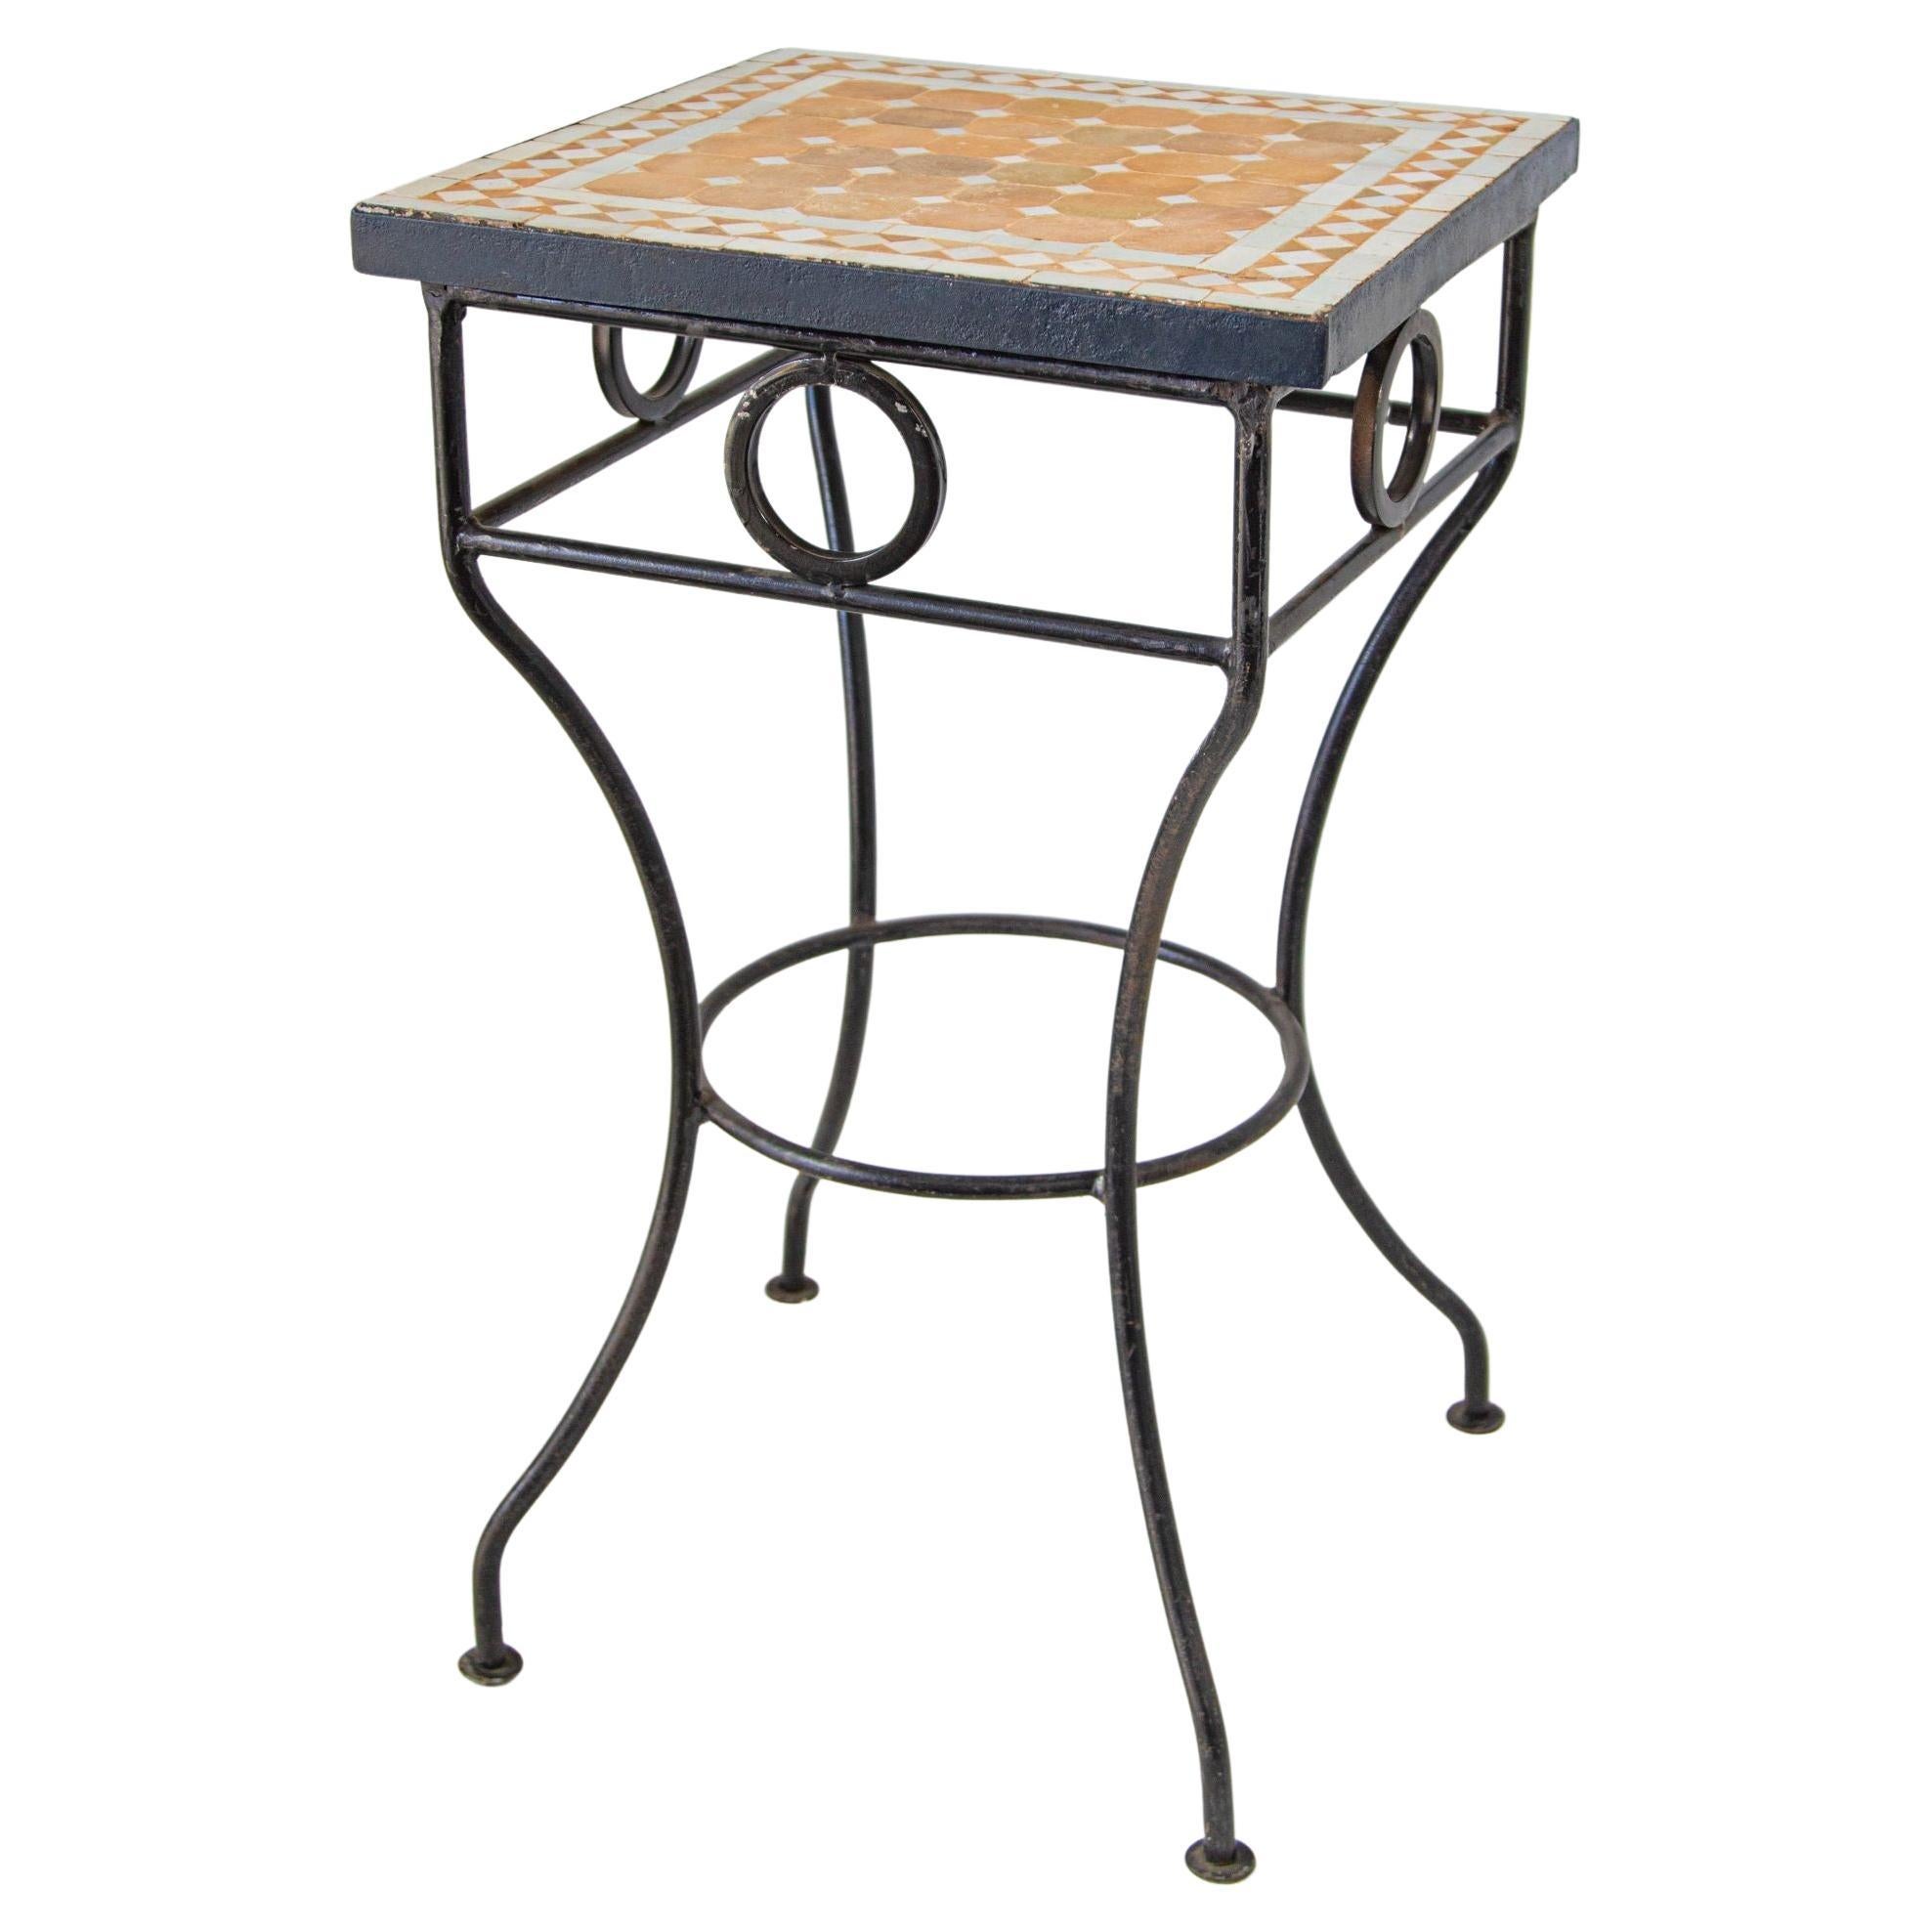 Vintage Moroccan Mosaic Outdoor Tile Table For Sale